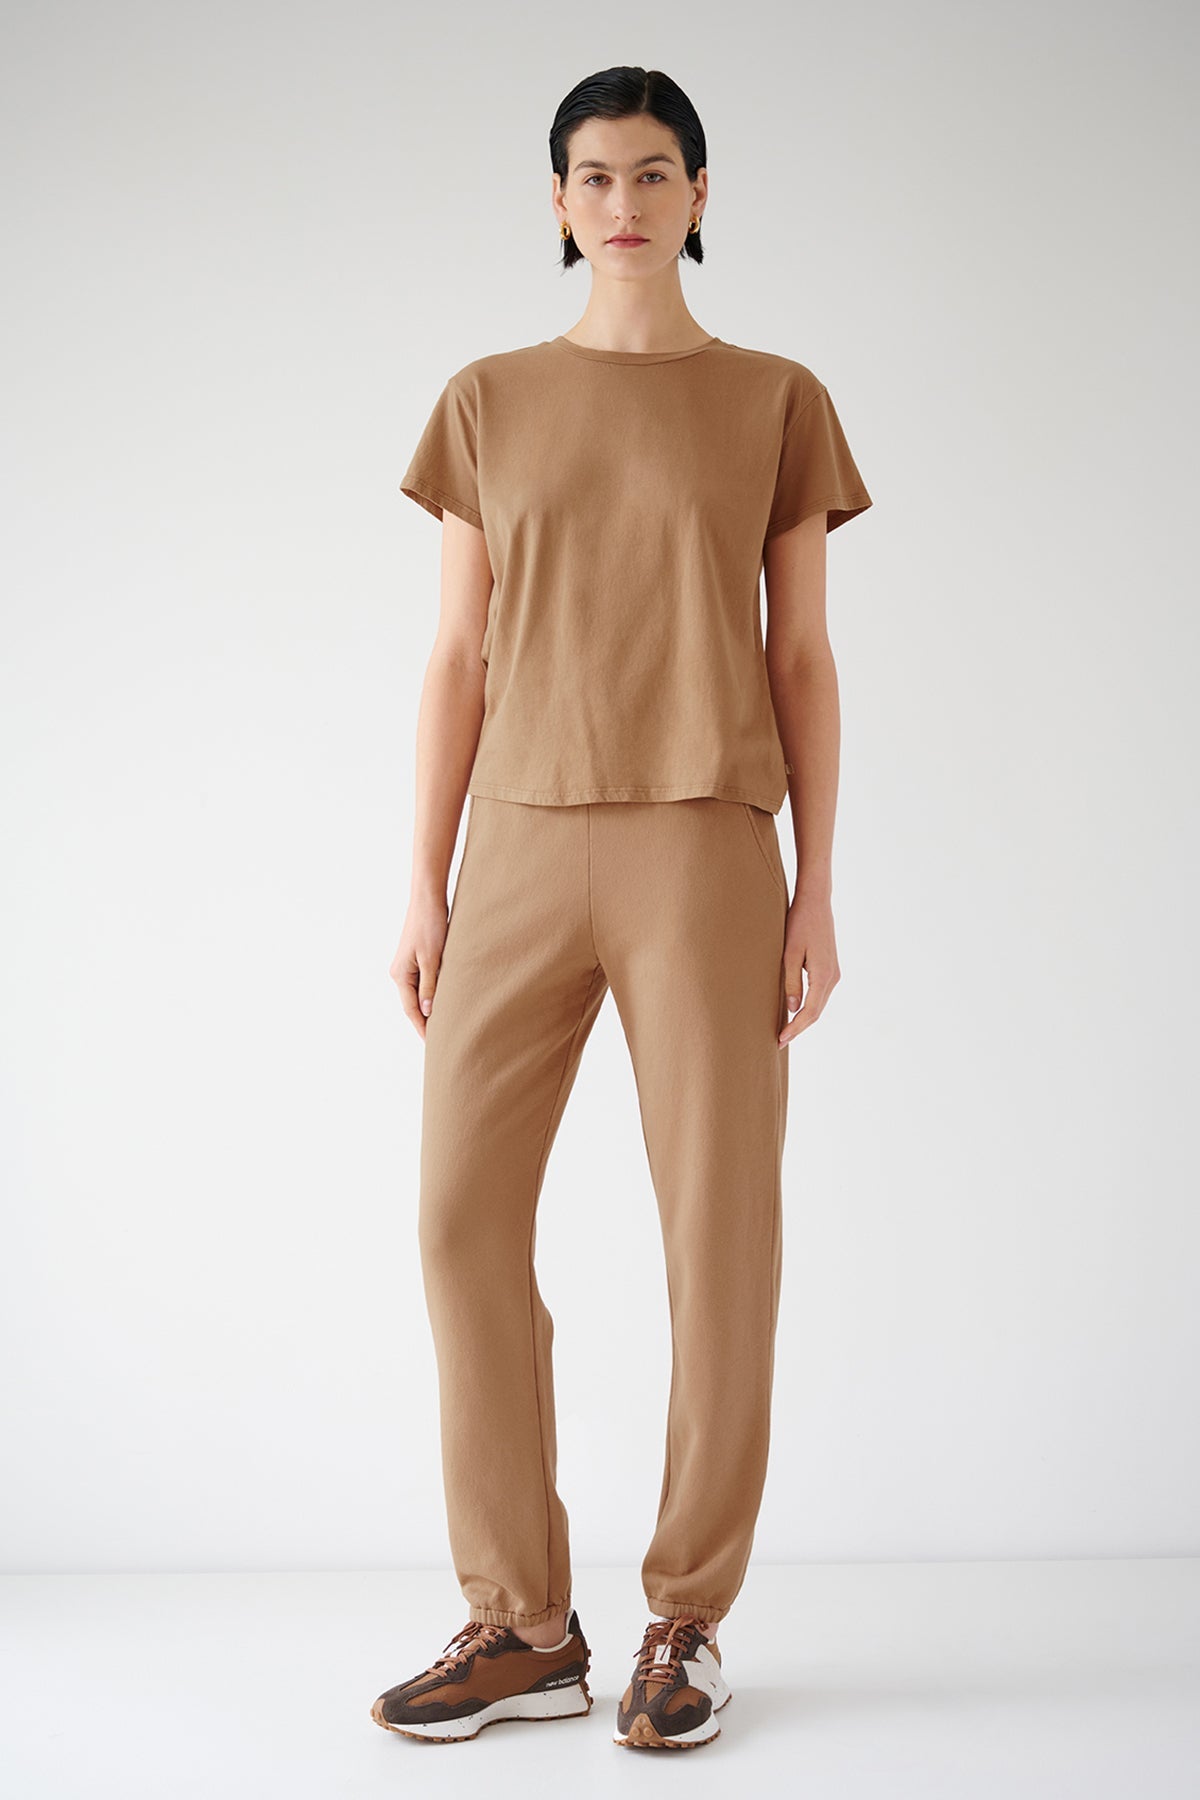 The model is wearing a tan t-shirt and Velvet by Jenny Graham ZUMA SWEATPANT.-36594727649473